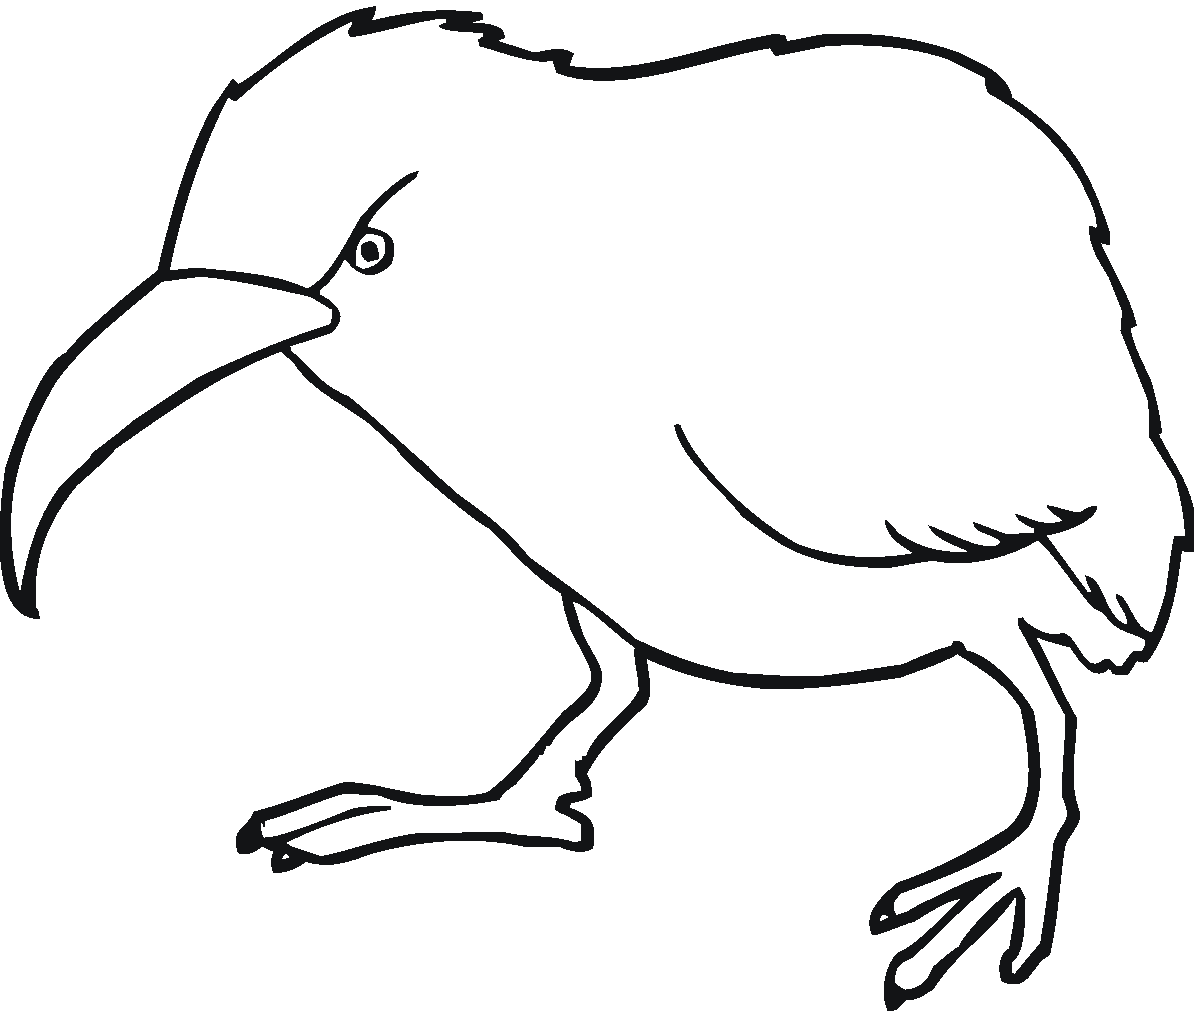 Kiwi Bird Coloring Page   Free Cliparts That You Can Download To You